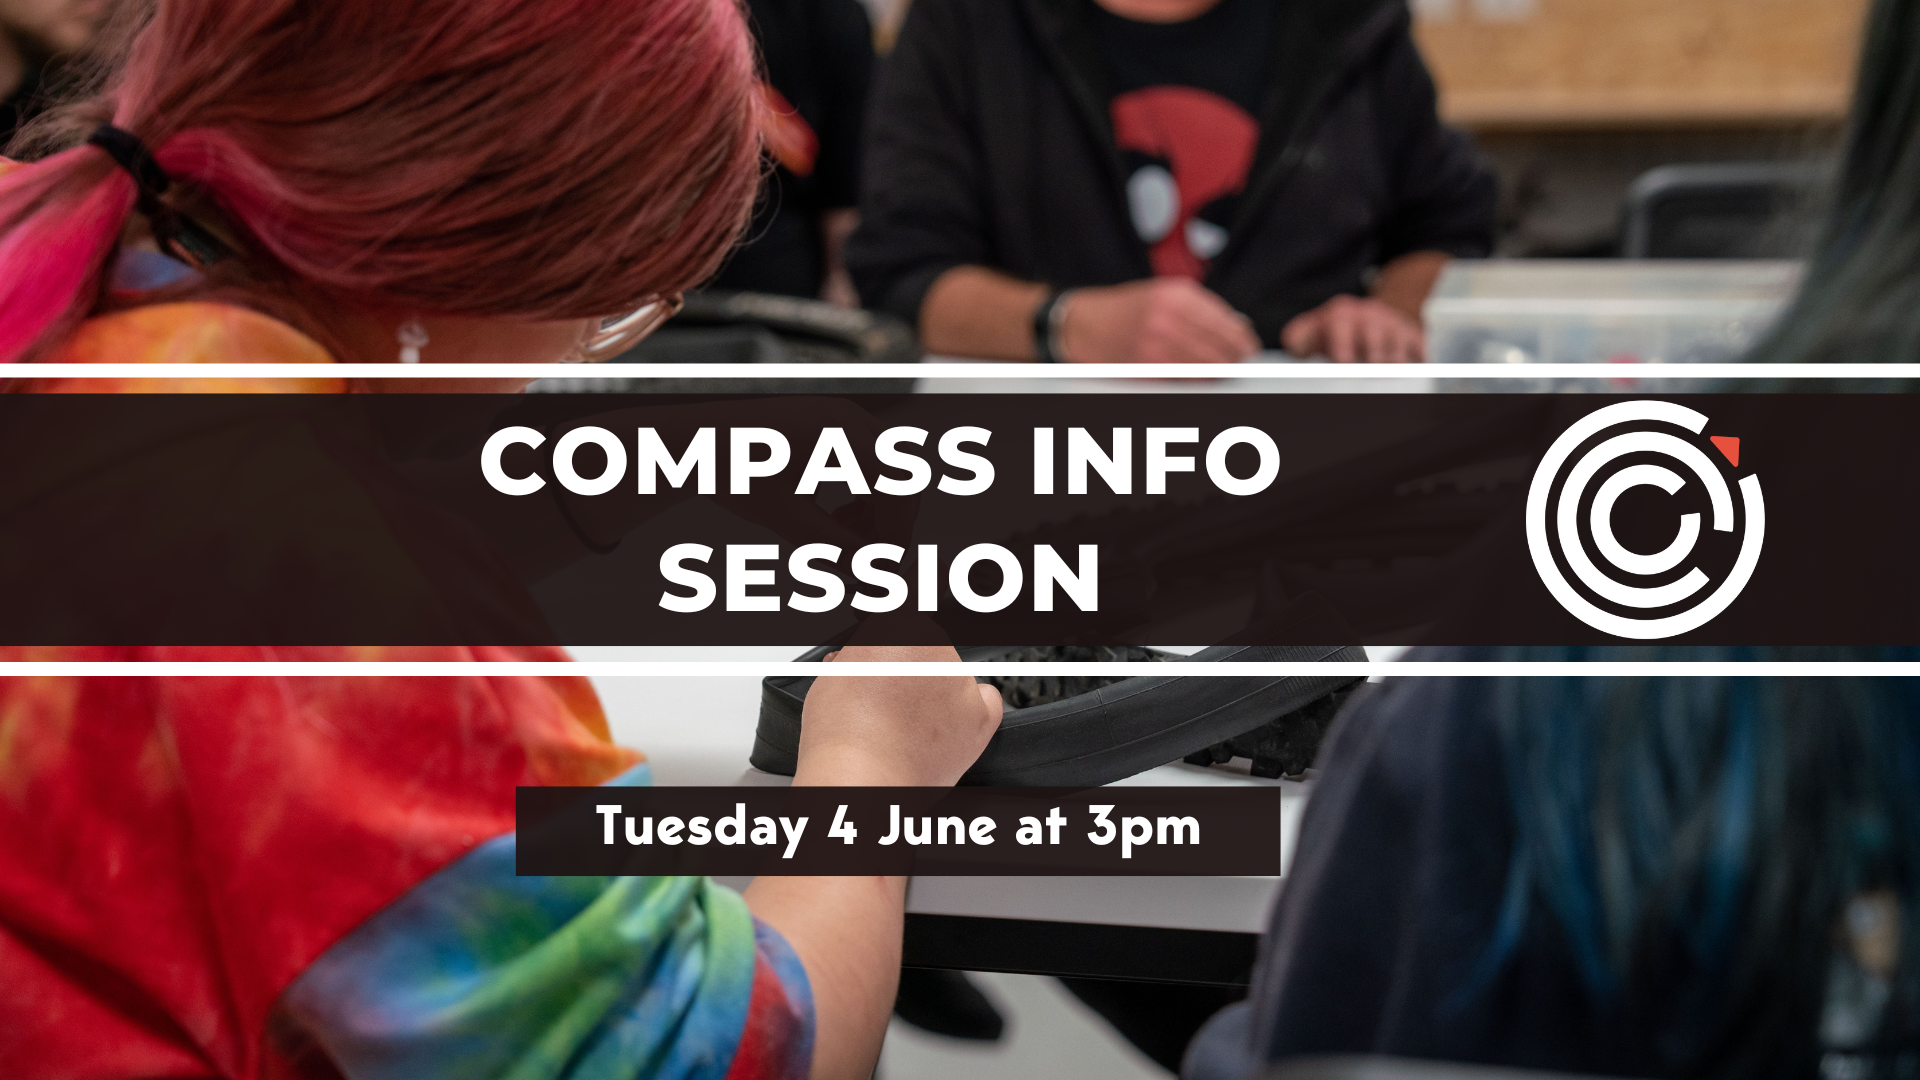 Compass Info Session - Tuesday 4 June